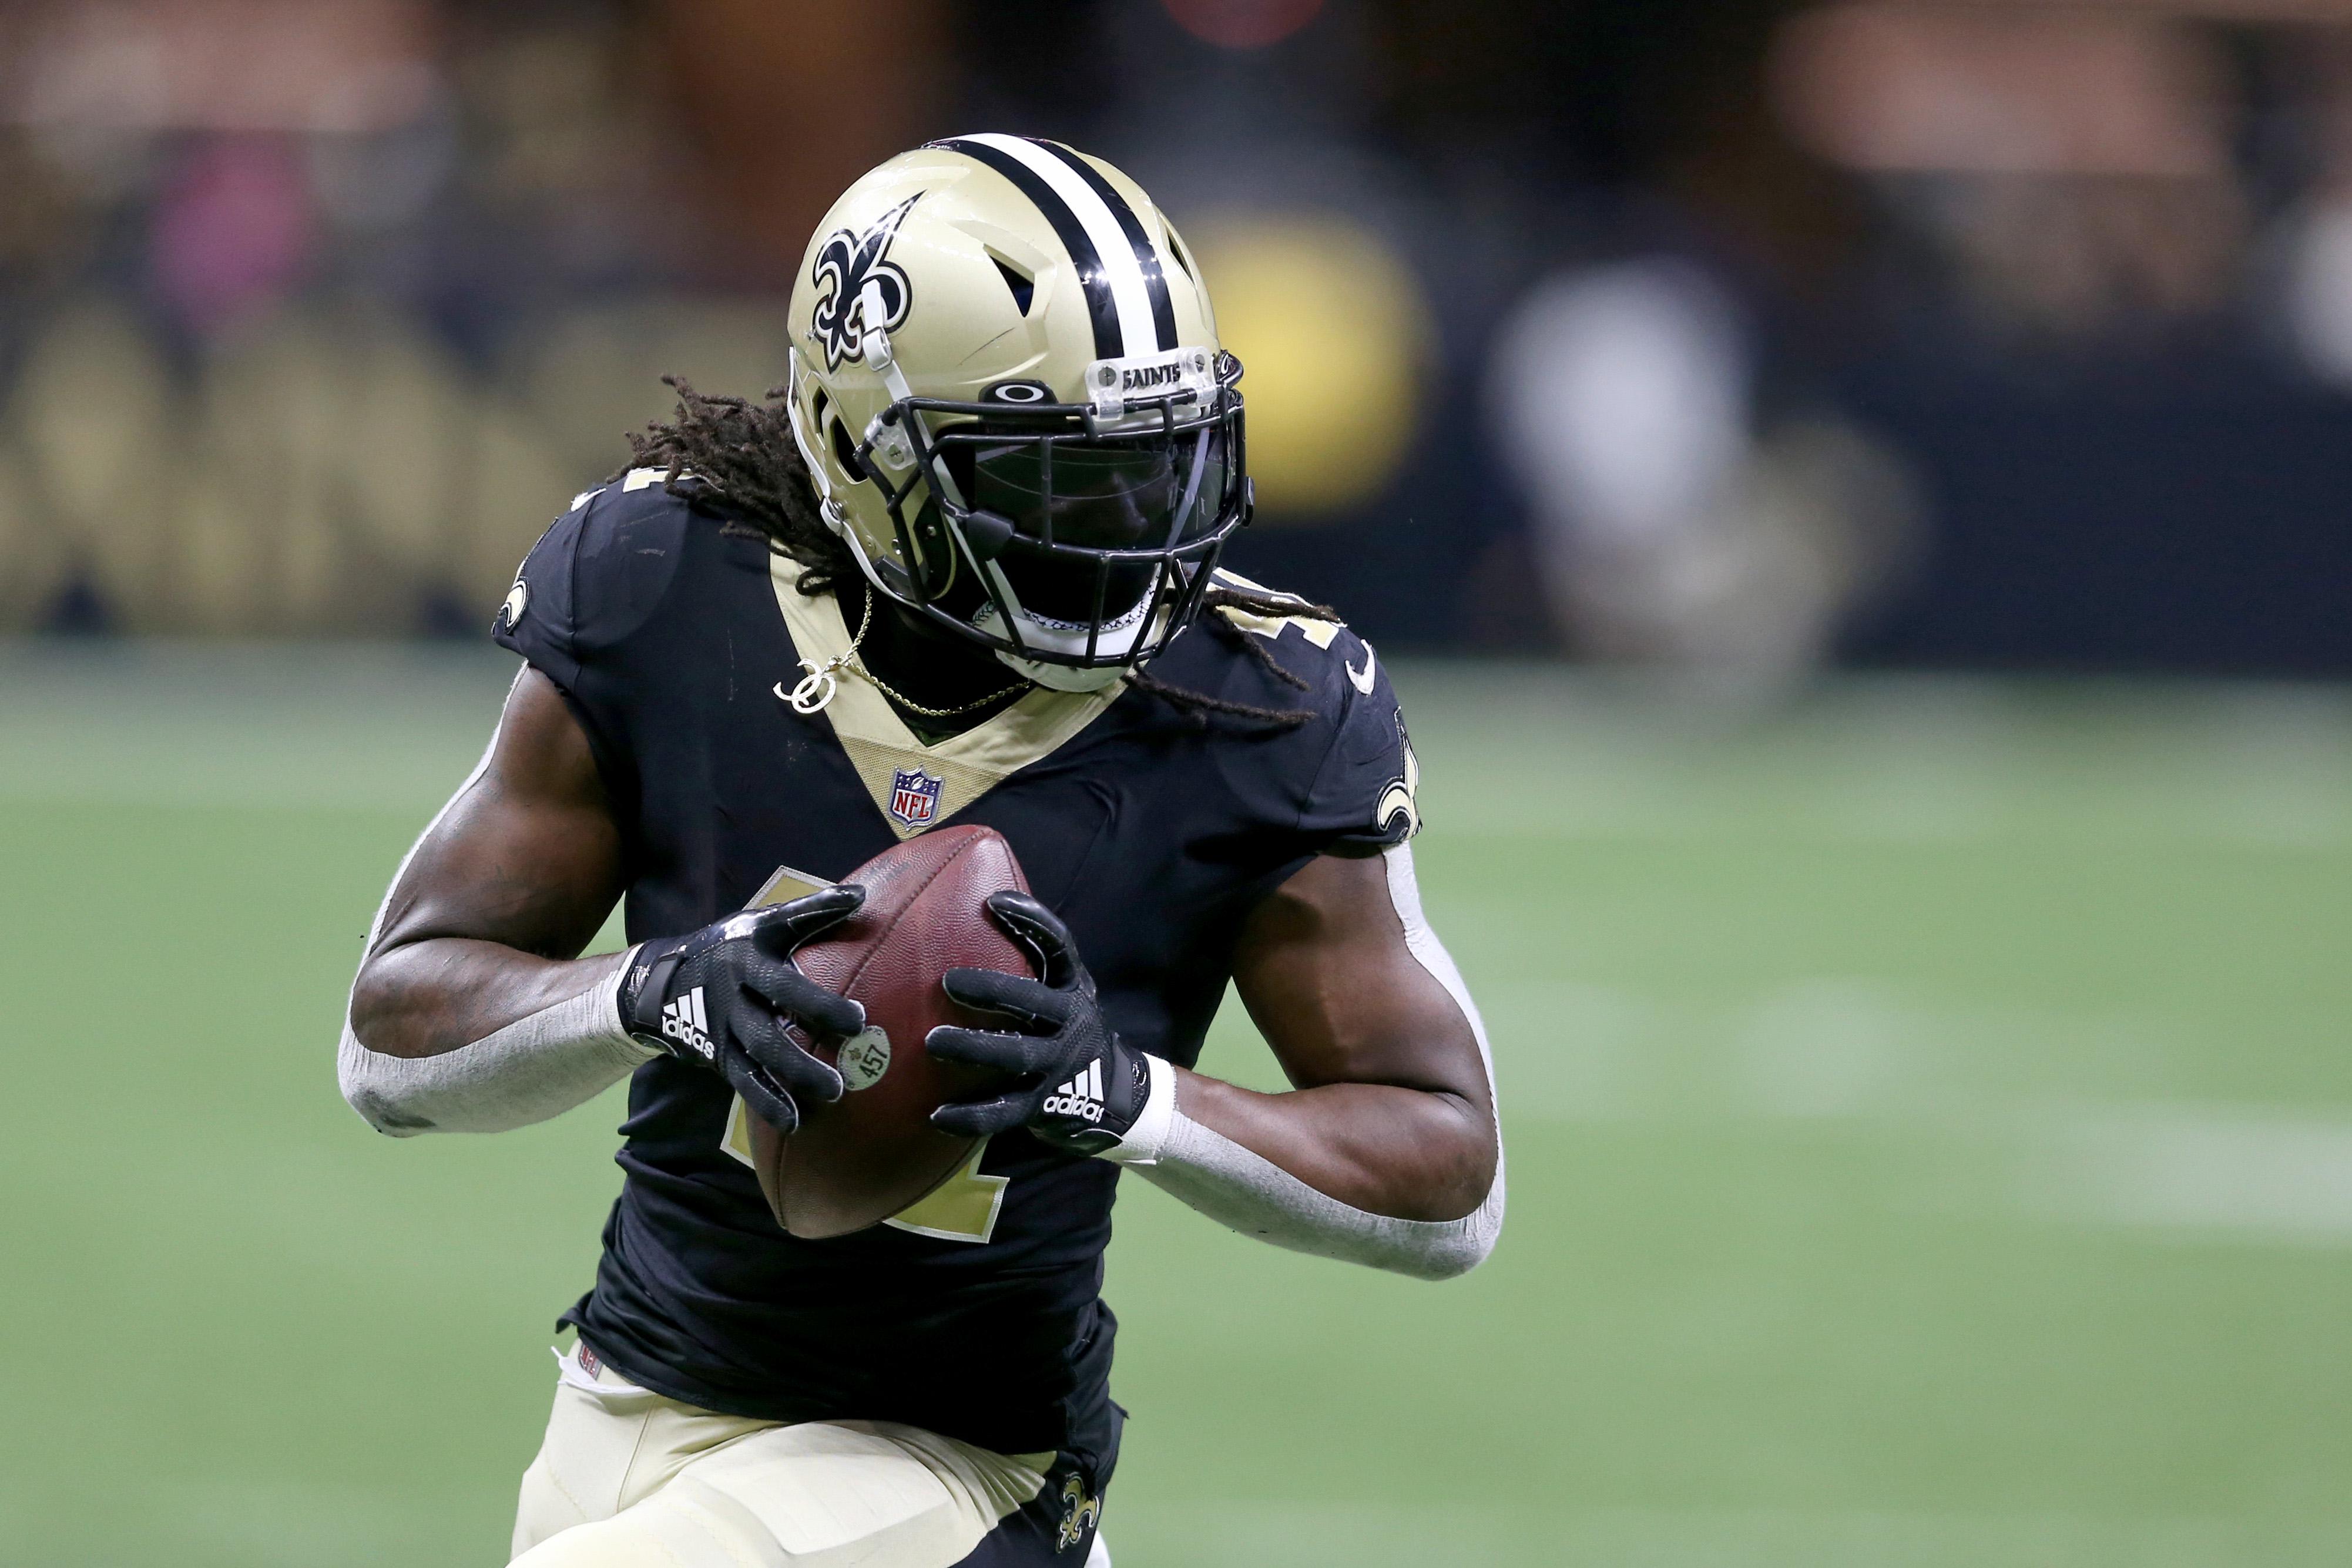 Off-Field Issues, Not Health, Remain the Concern for Saints Star Alvin Kamara